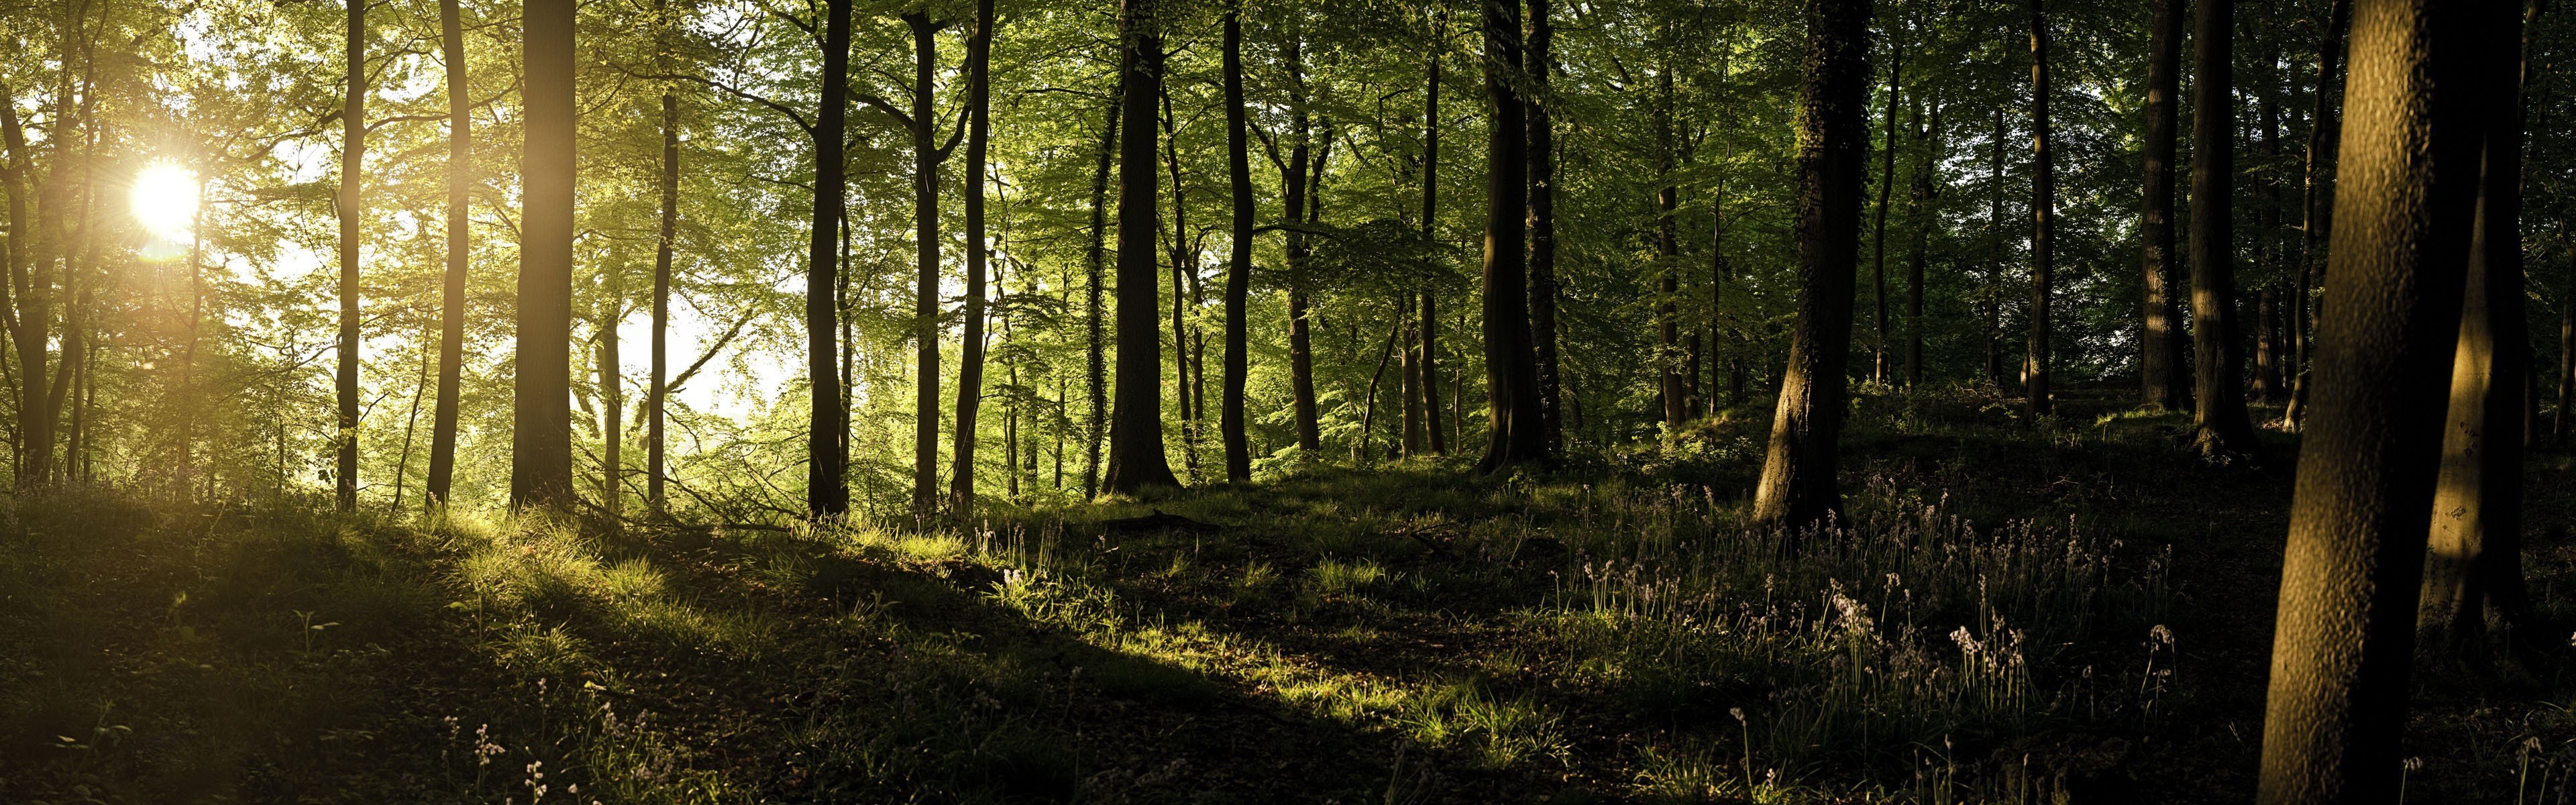  England forests sunlight United Kingdom panorama wallpaper background